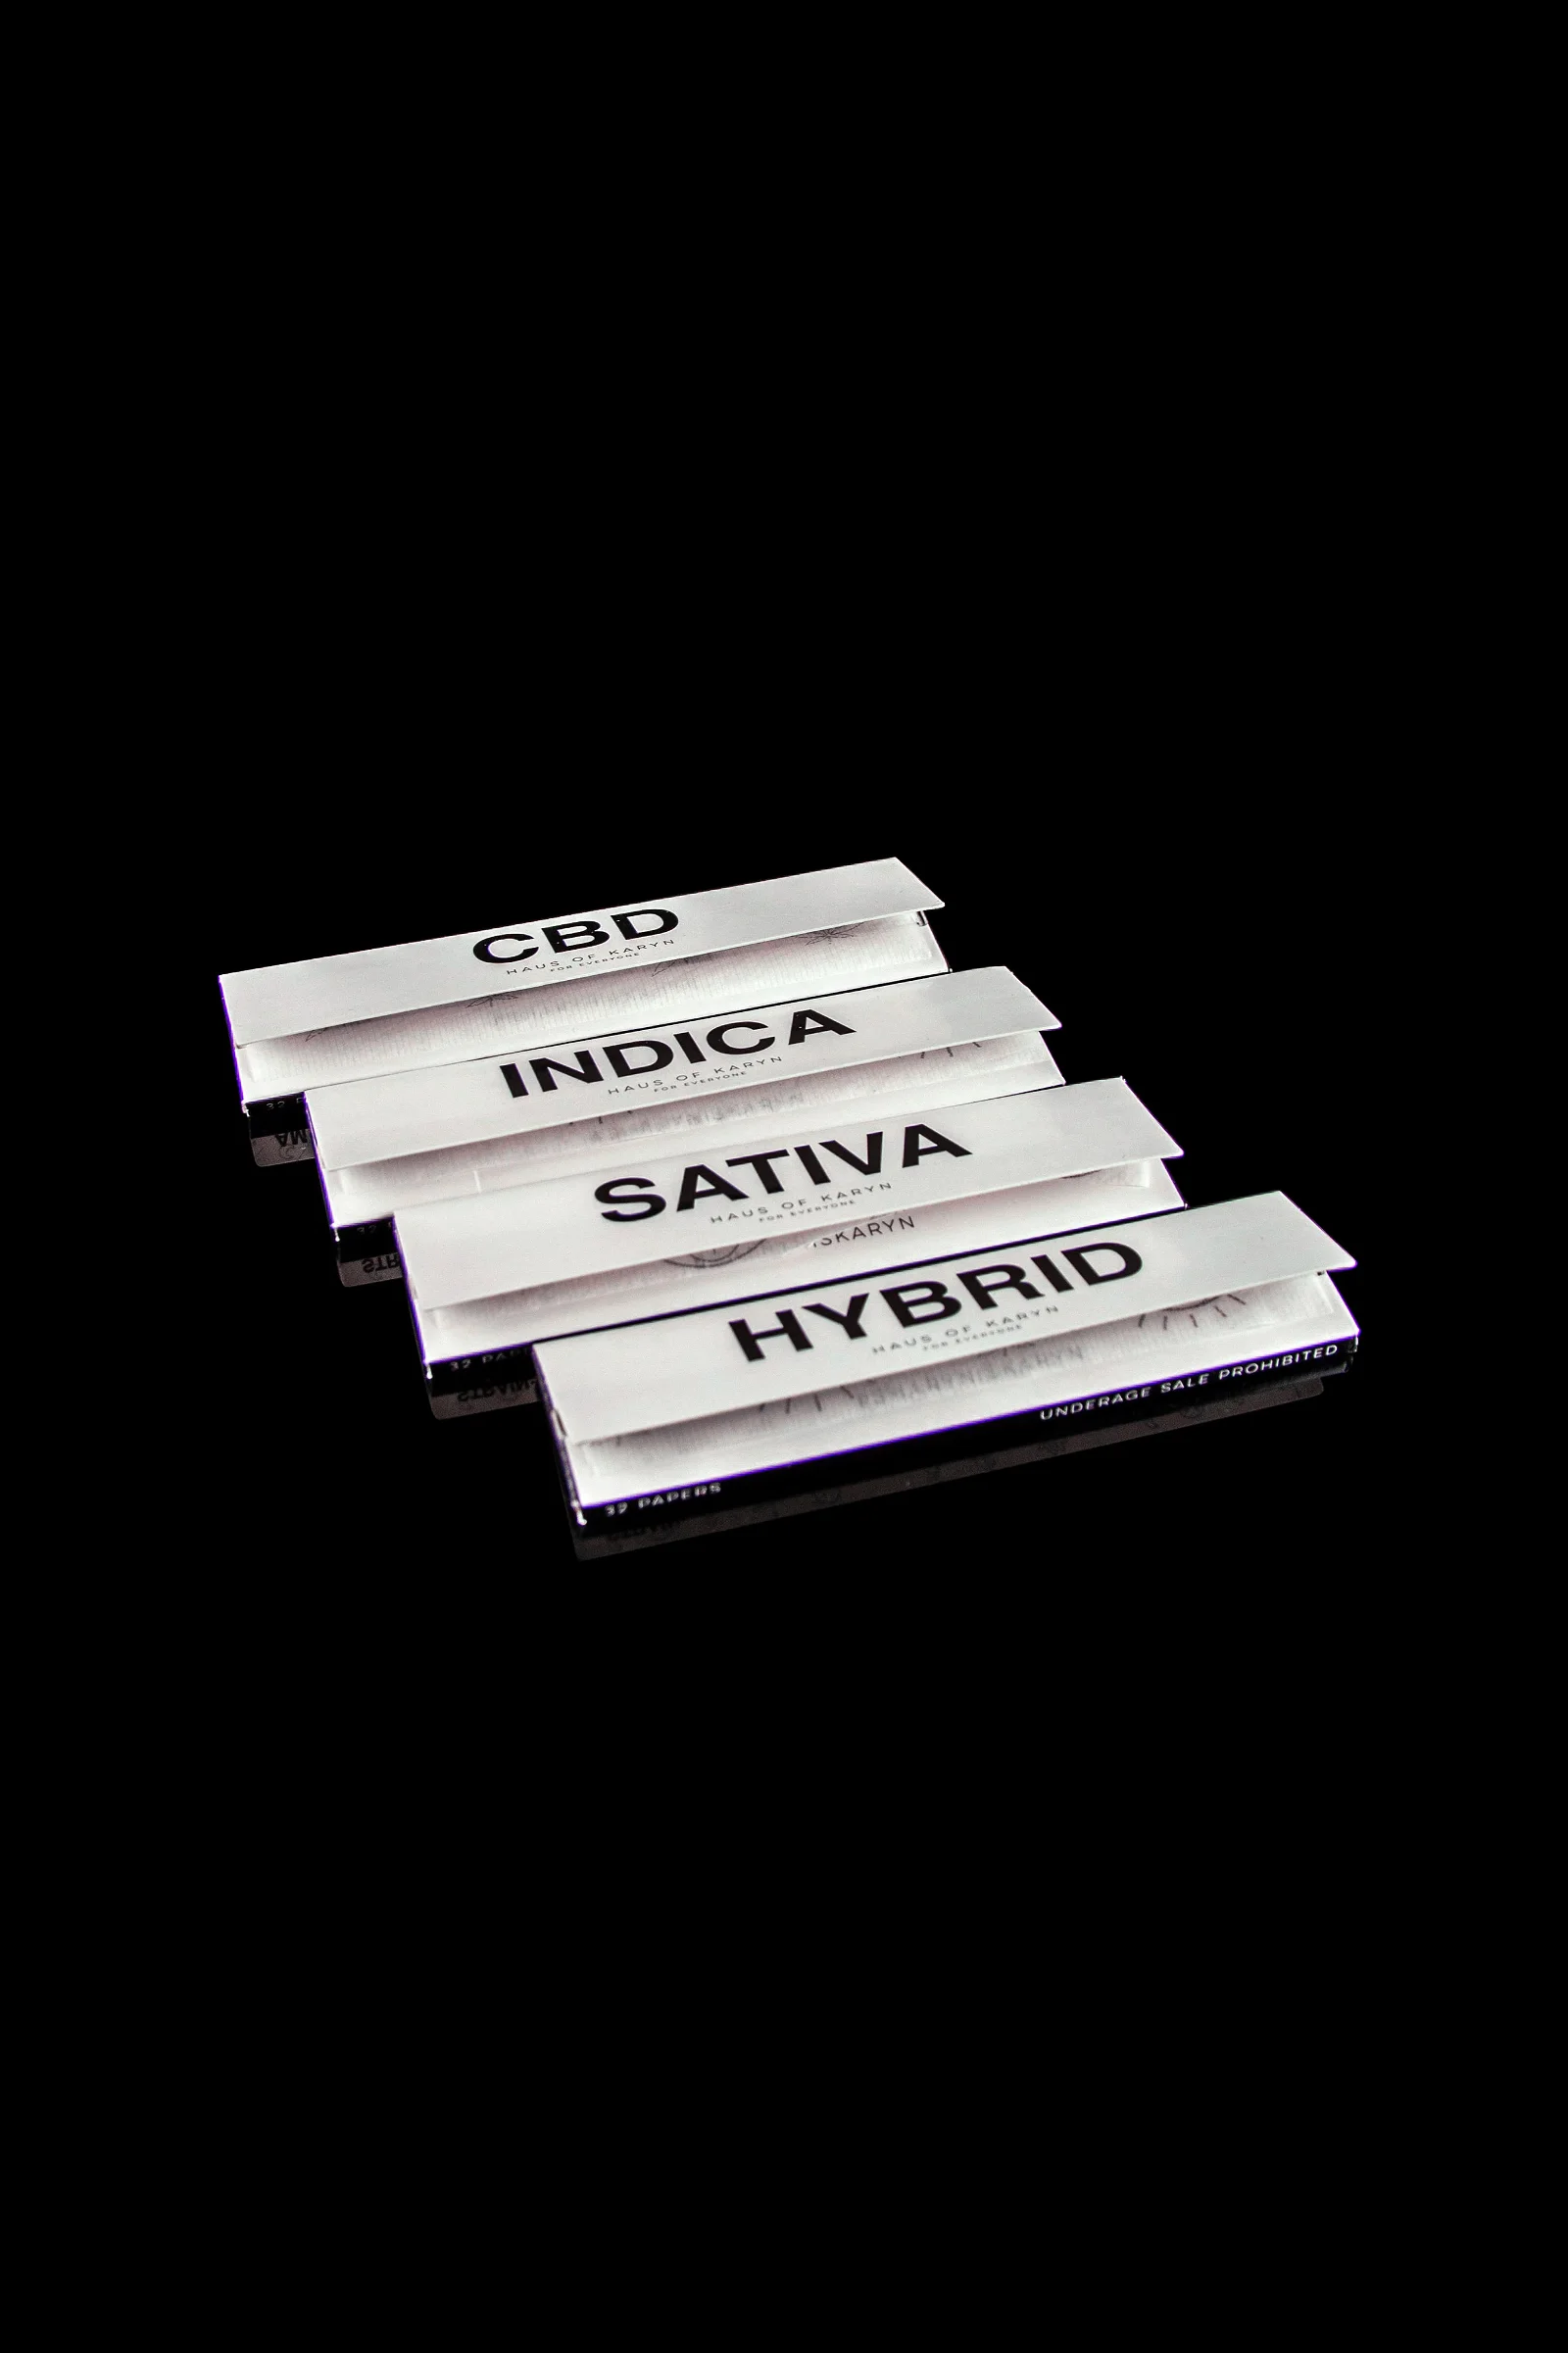 Image of Haus of Karyn Quadfecta King Size Rolling Papers - 4 Pack